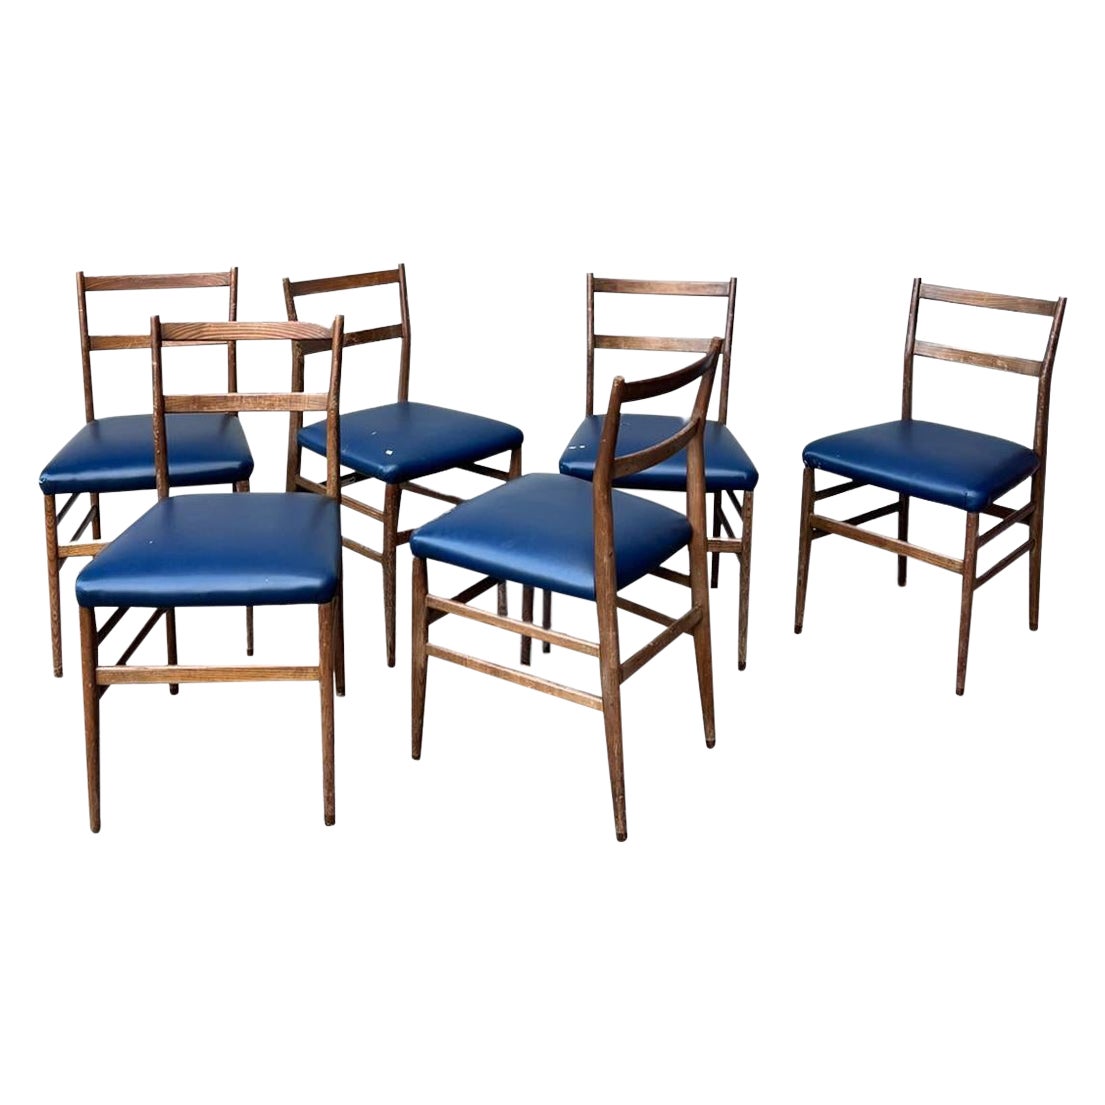 Set of nine Vintage Italian Leggera Blue Dining Chairs by Gio Ponti for Cassina For Sale